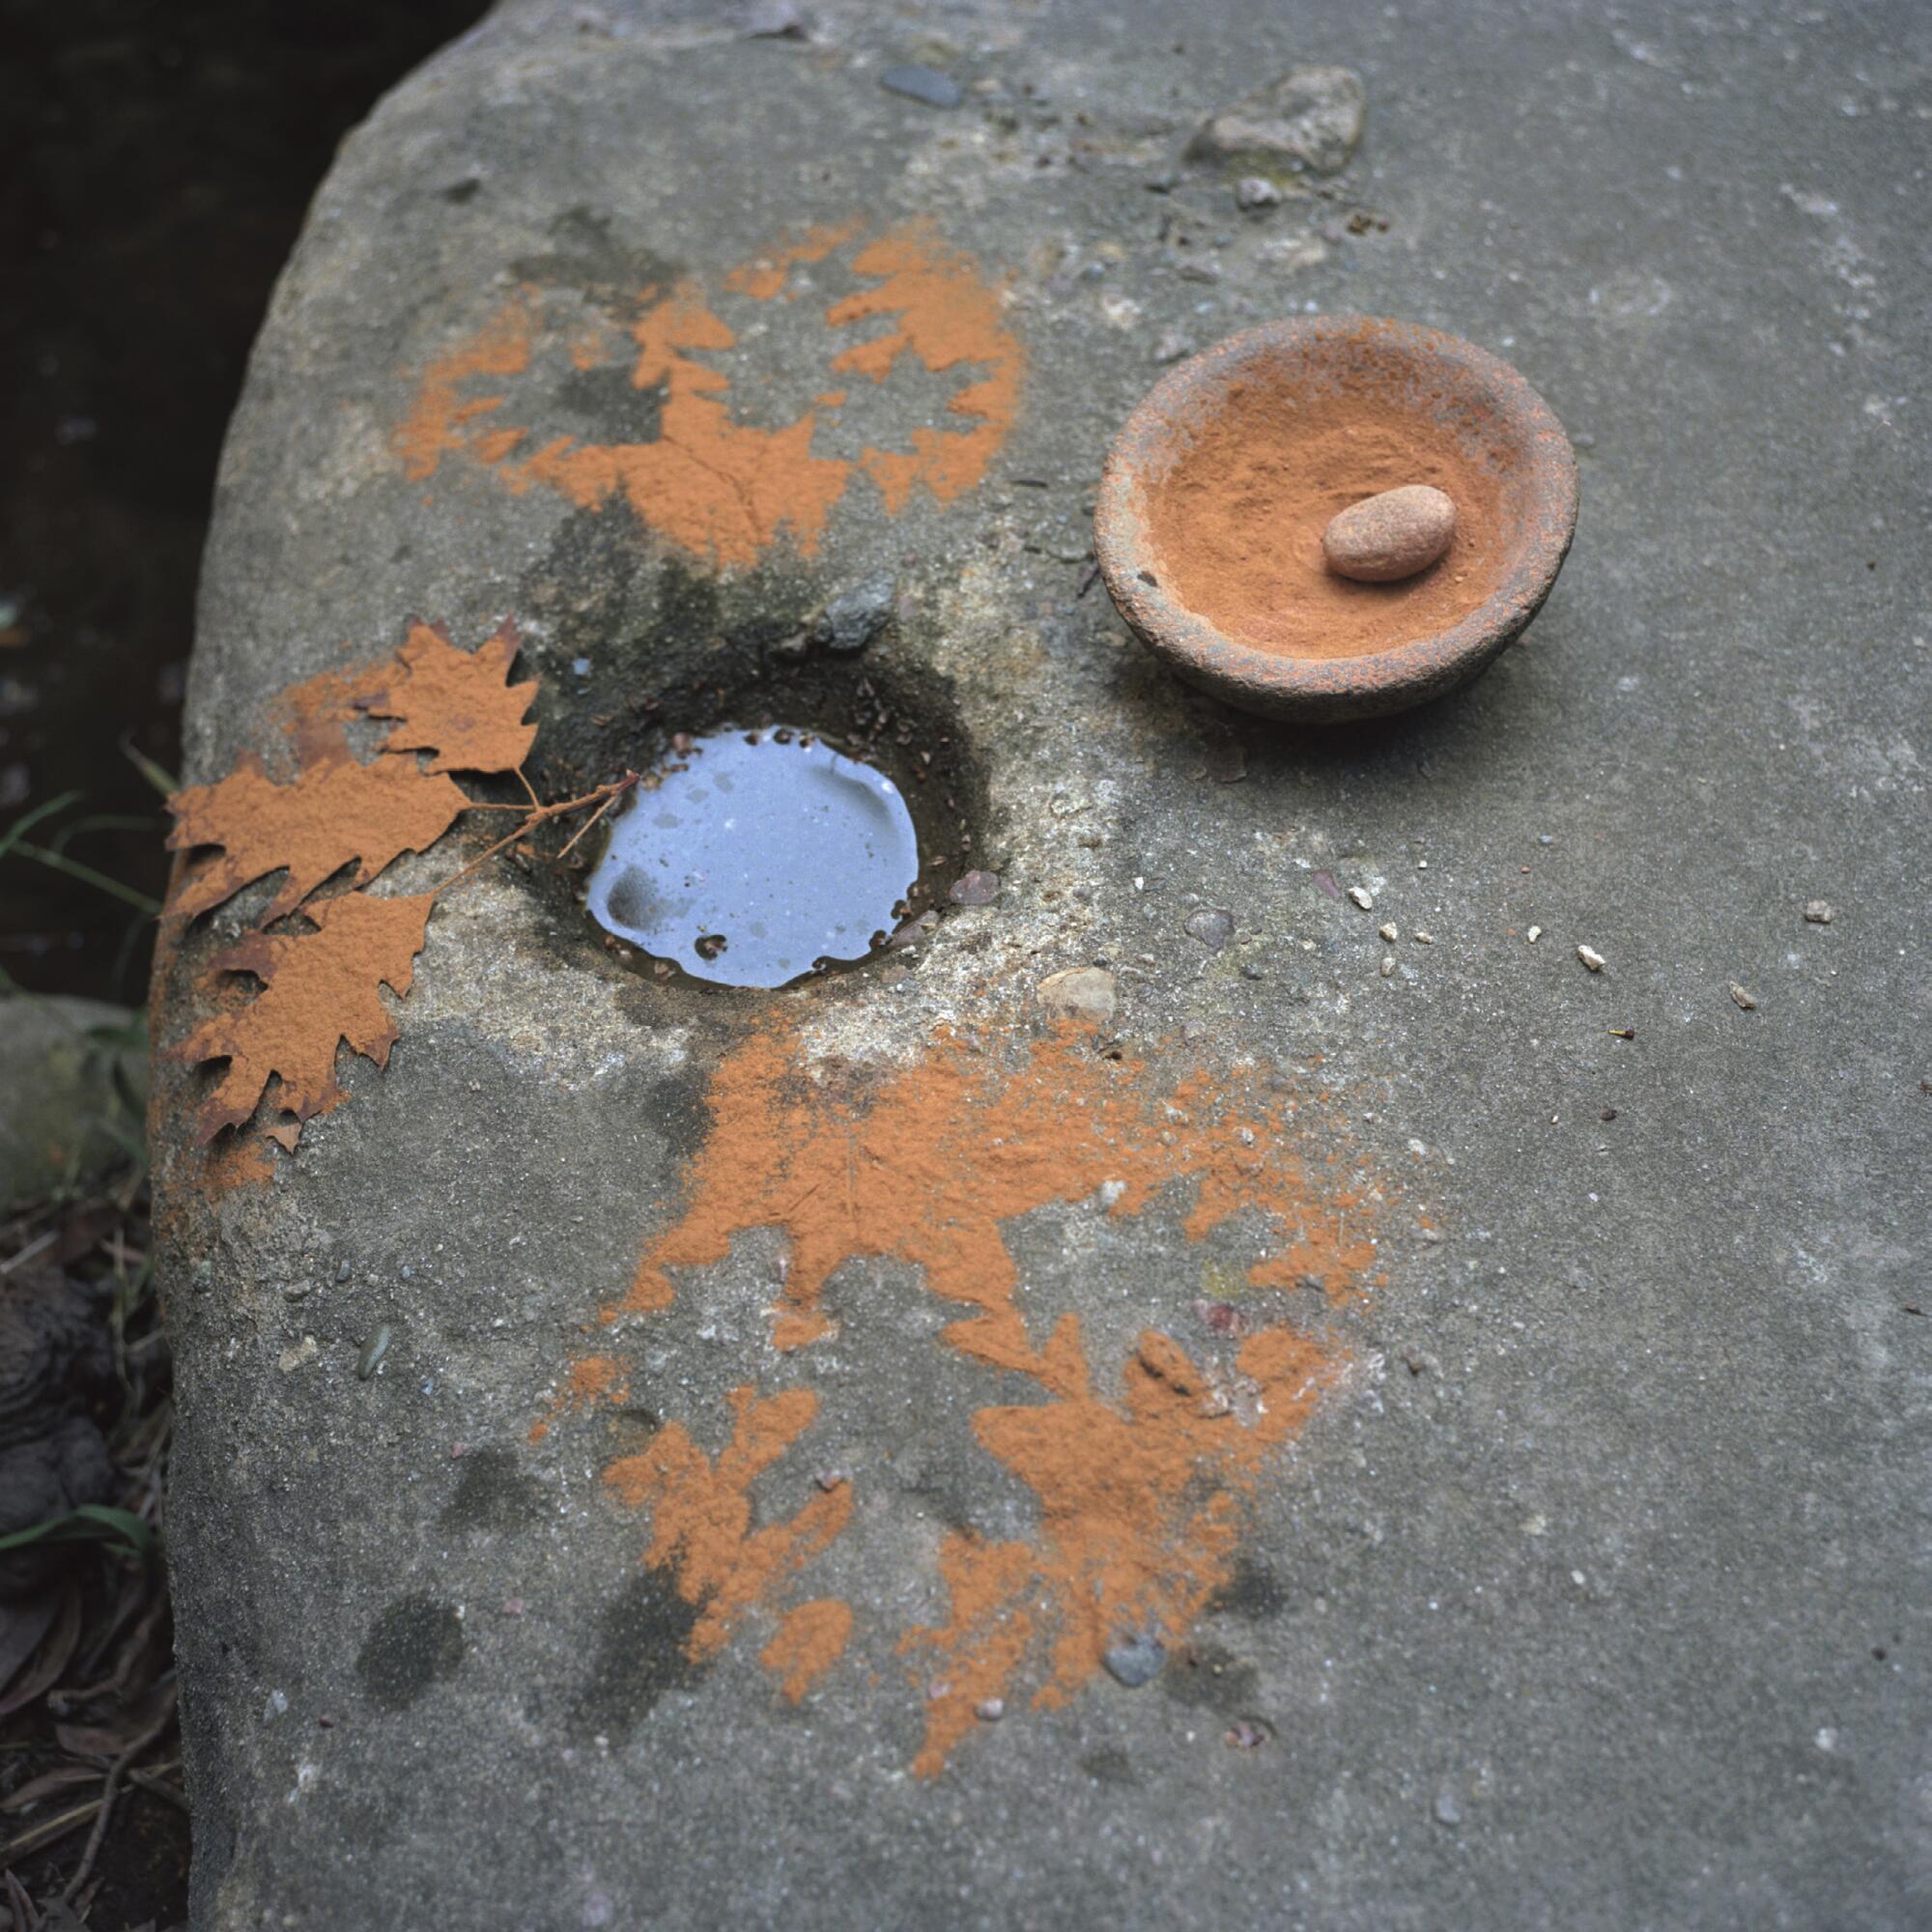 A color photograph shows a granite boulder, its mortar filled with water and framed by oak leaves and ochre pigment.